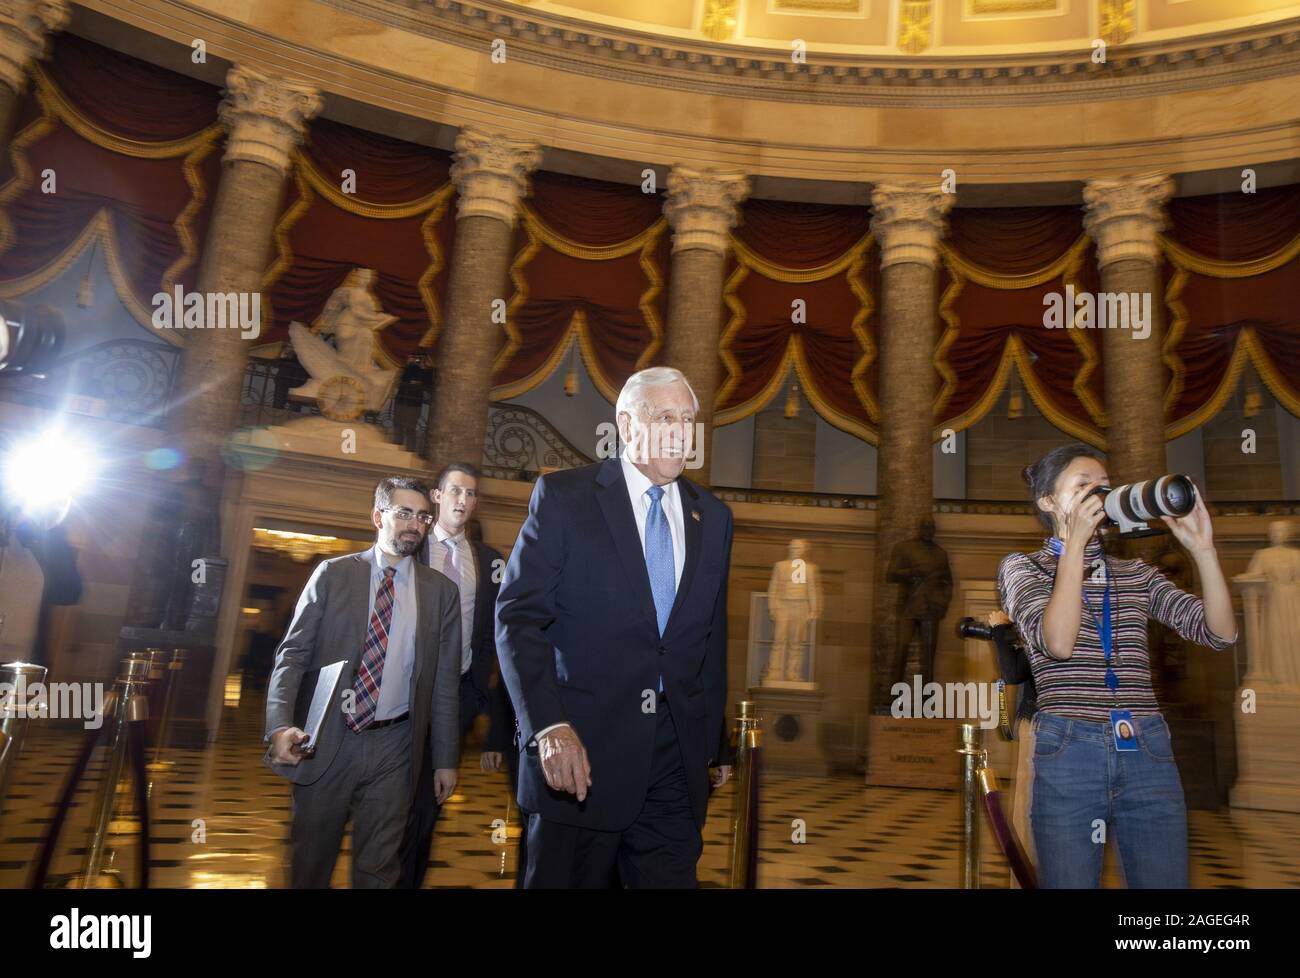 Washington, United States. 18th Dec, 2019. U.S. Representative Steny Hoyer (D-MD walks to the house floor on Capitol Hill in Washington, DC on Wednesday, December 18, 2019. The House voted on articles of impeachment against President Donald Trump today. Photo by Tasos Katopodis/UPI Credit: UPI/Alamy Live News Stock Photo